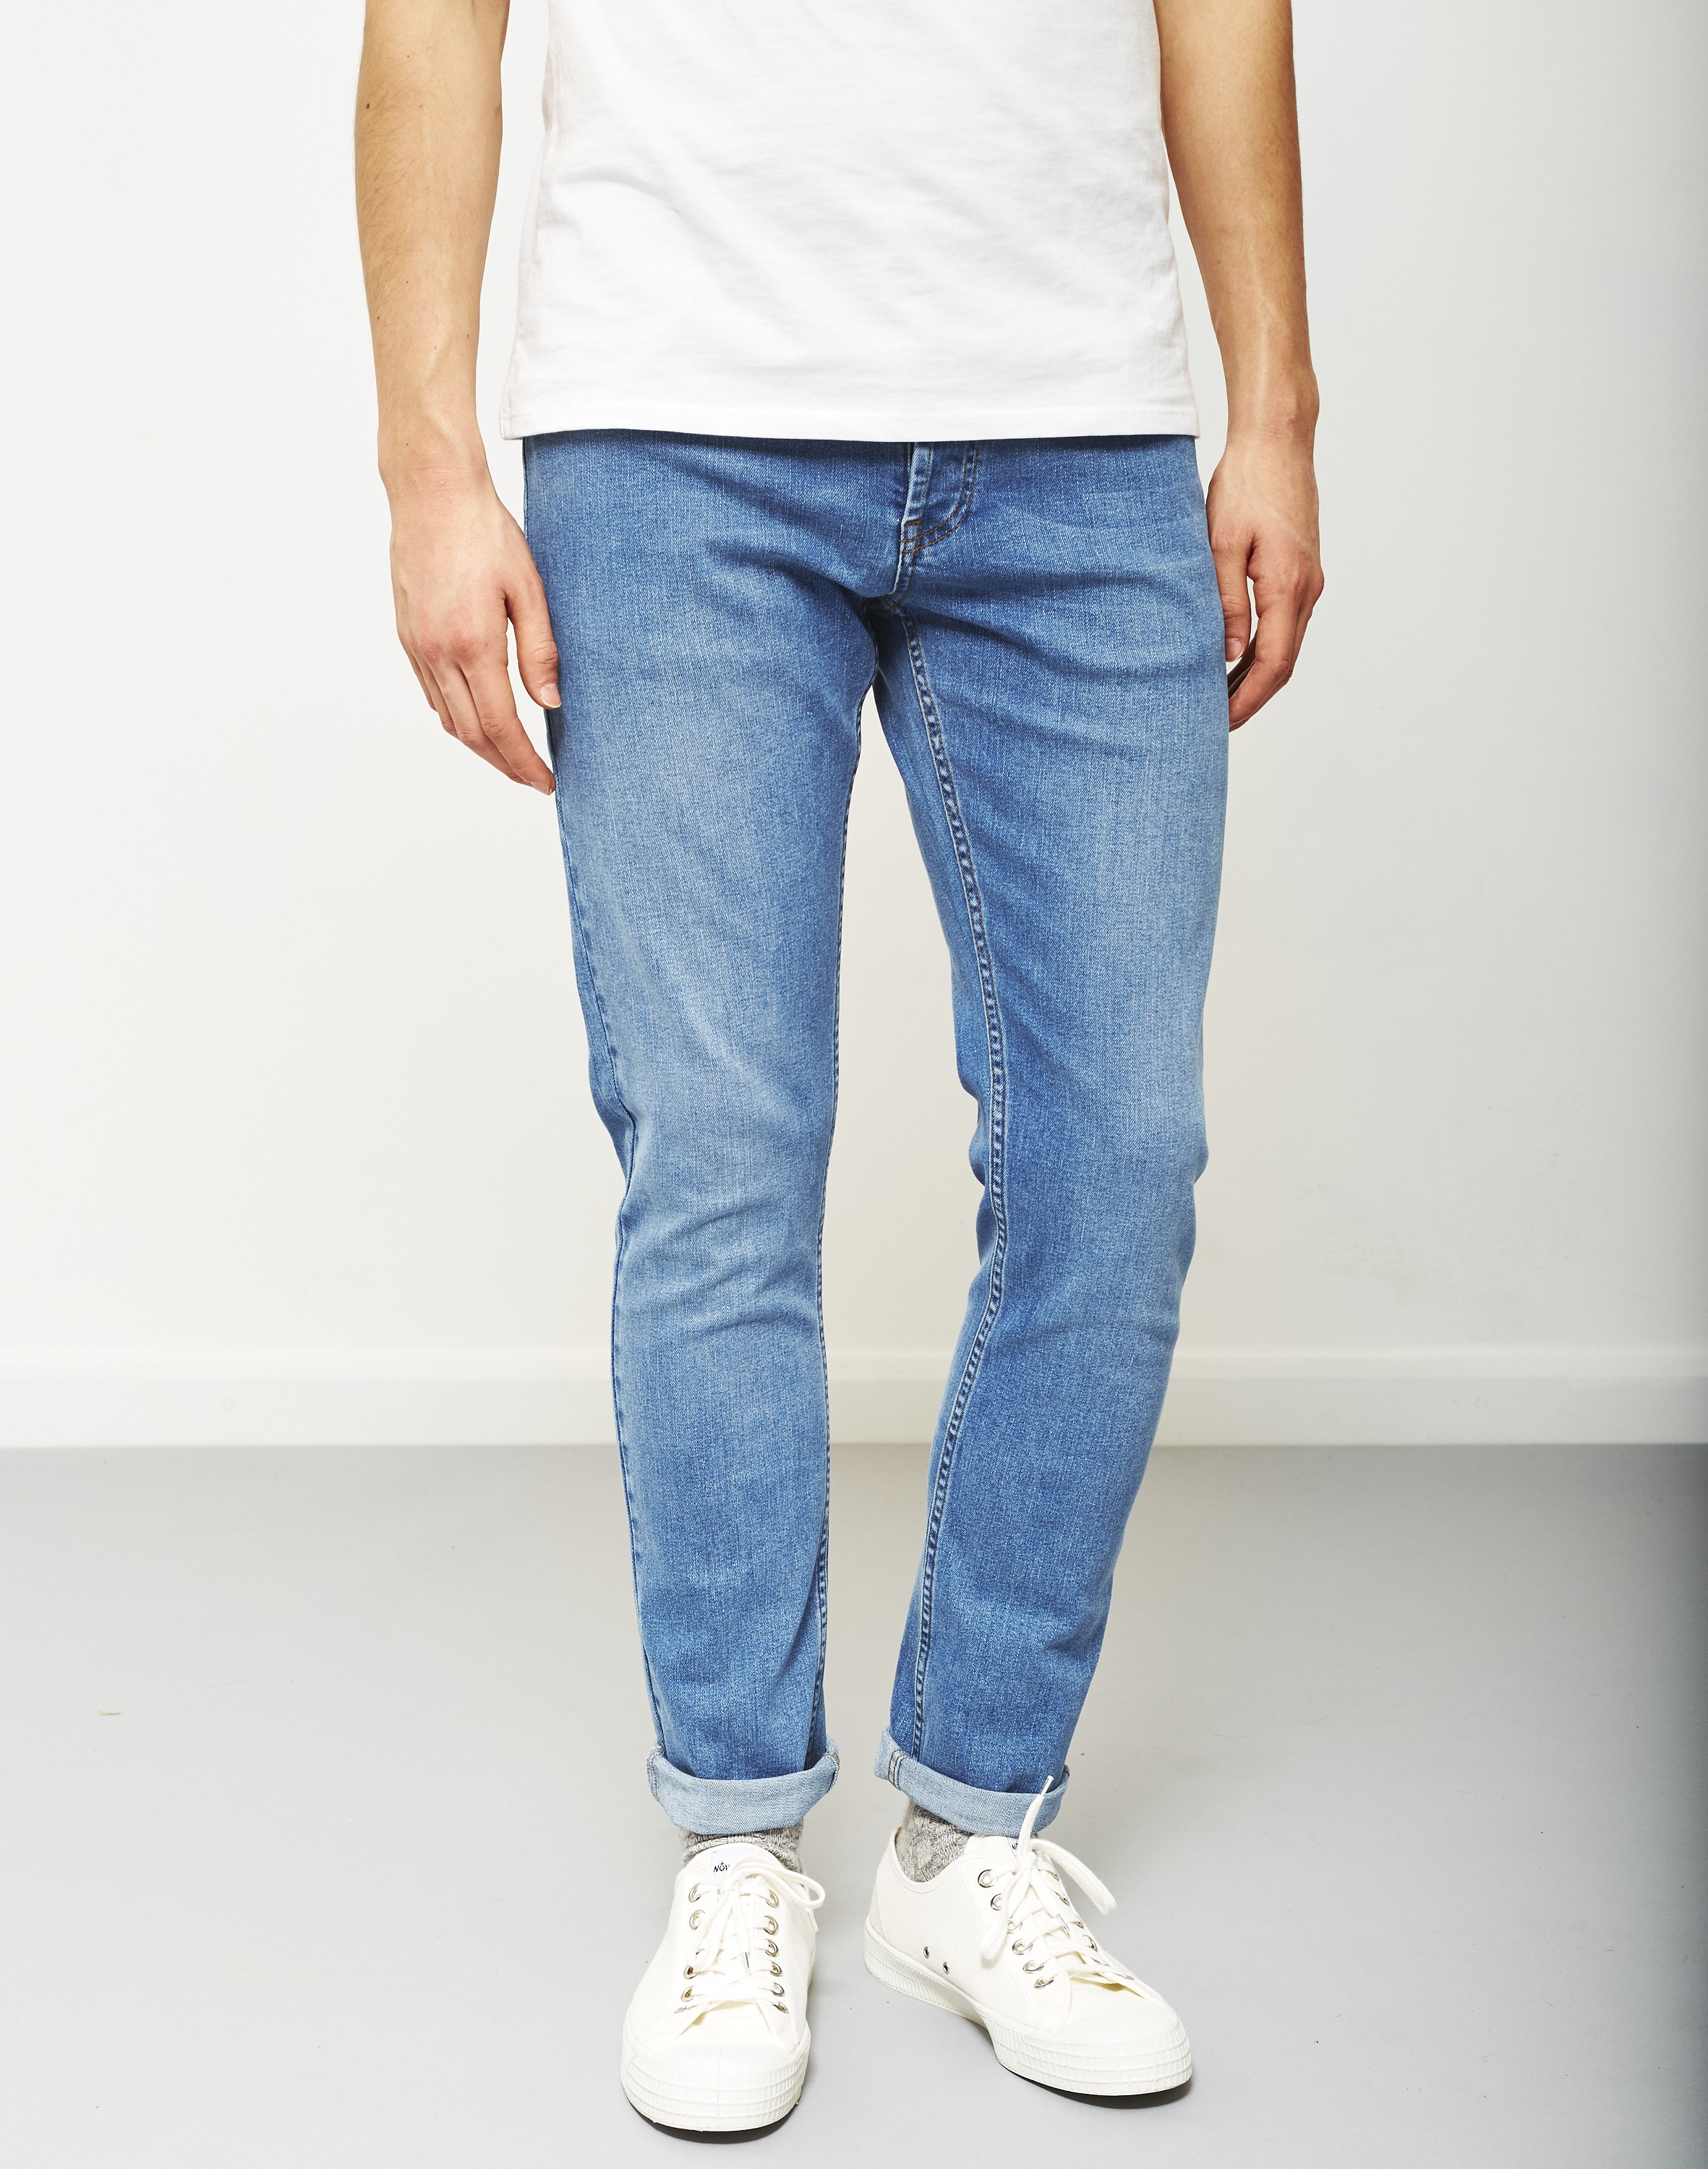 The Idle Man Slim Fit Jeans Stone Wash at The Idle Man